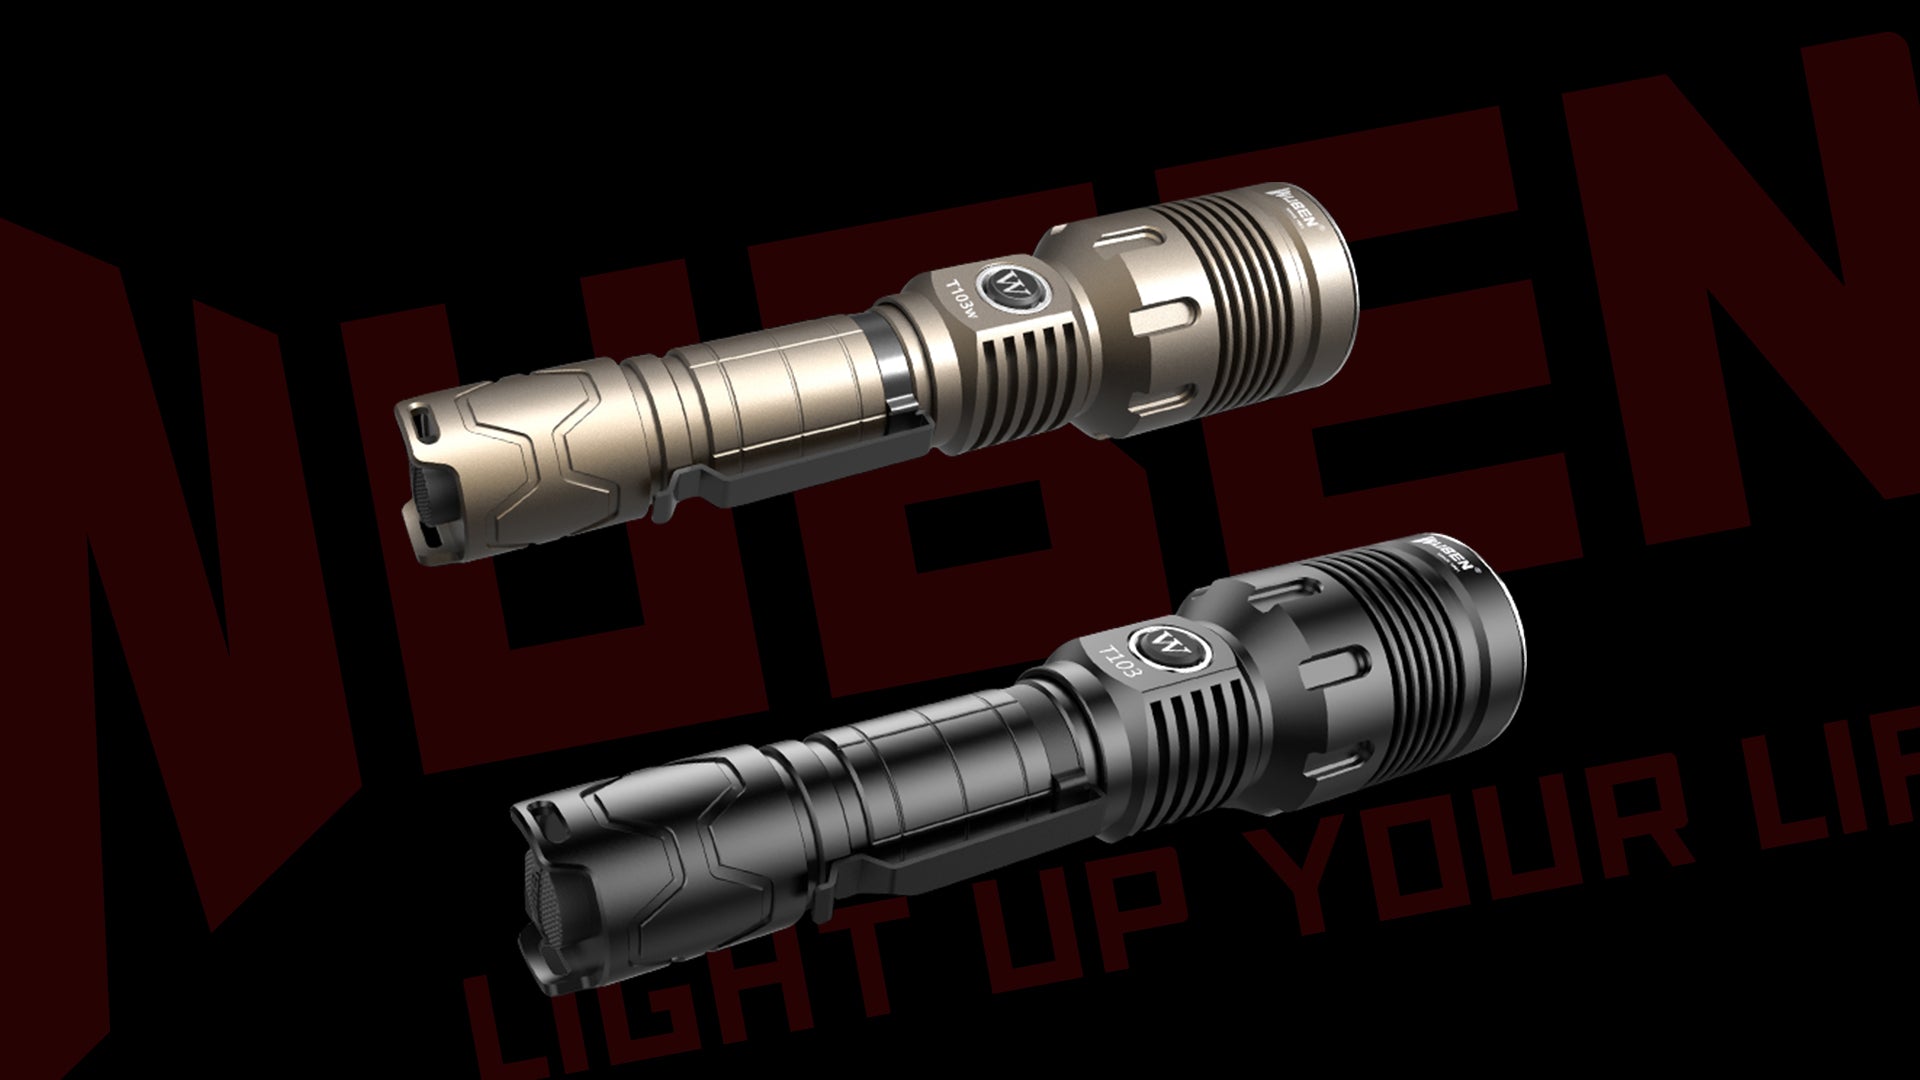 Wuben T103 Pro Tactical Flashlight is available in a choice of 2 colors” style=